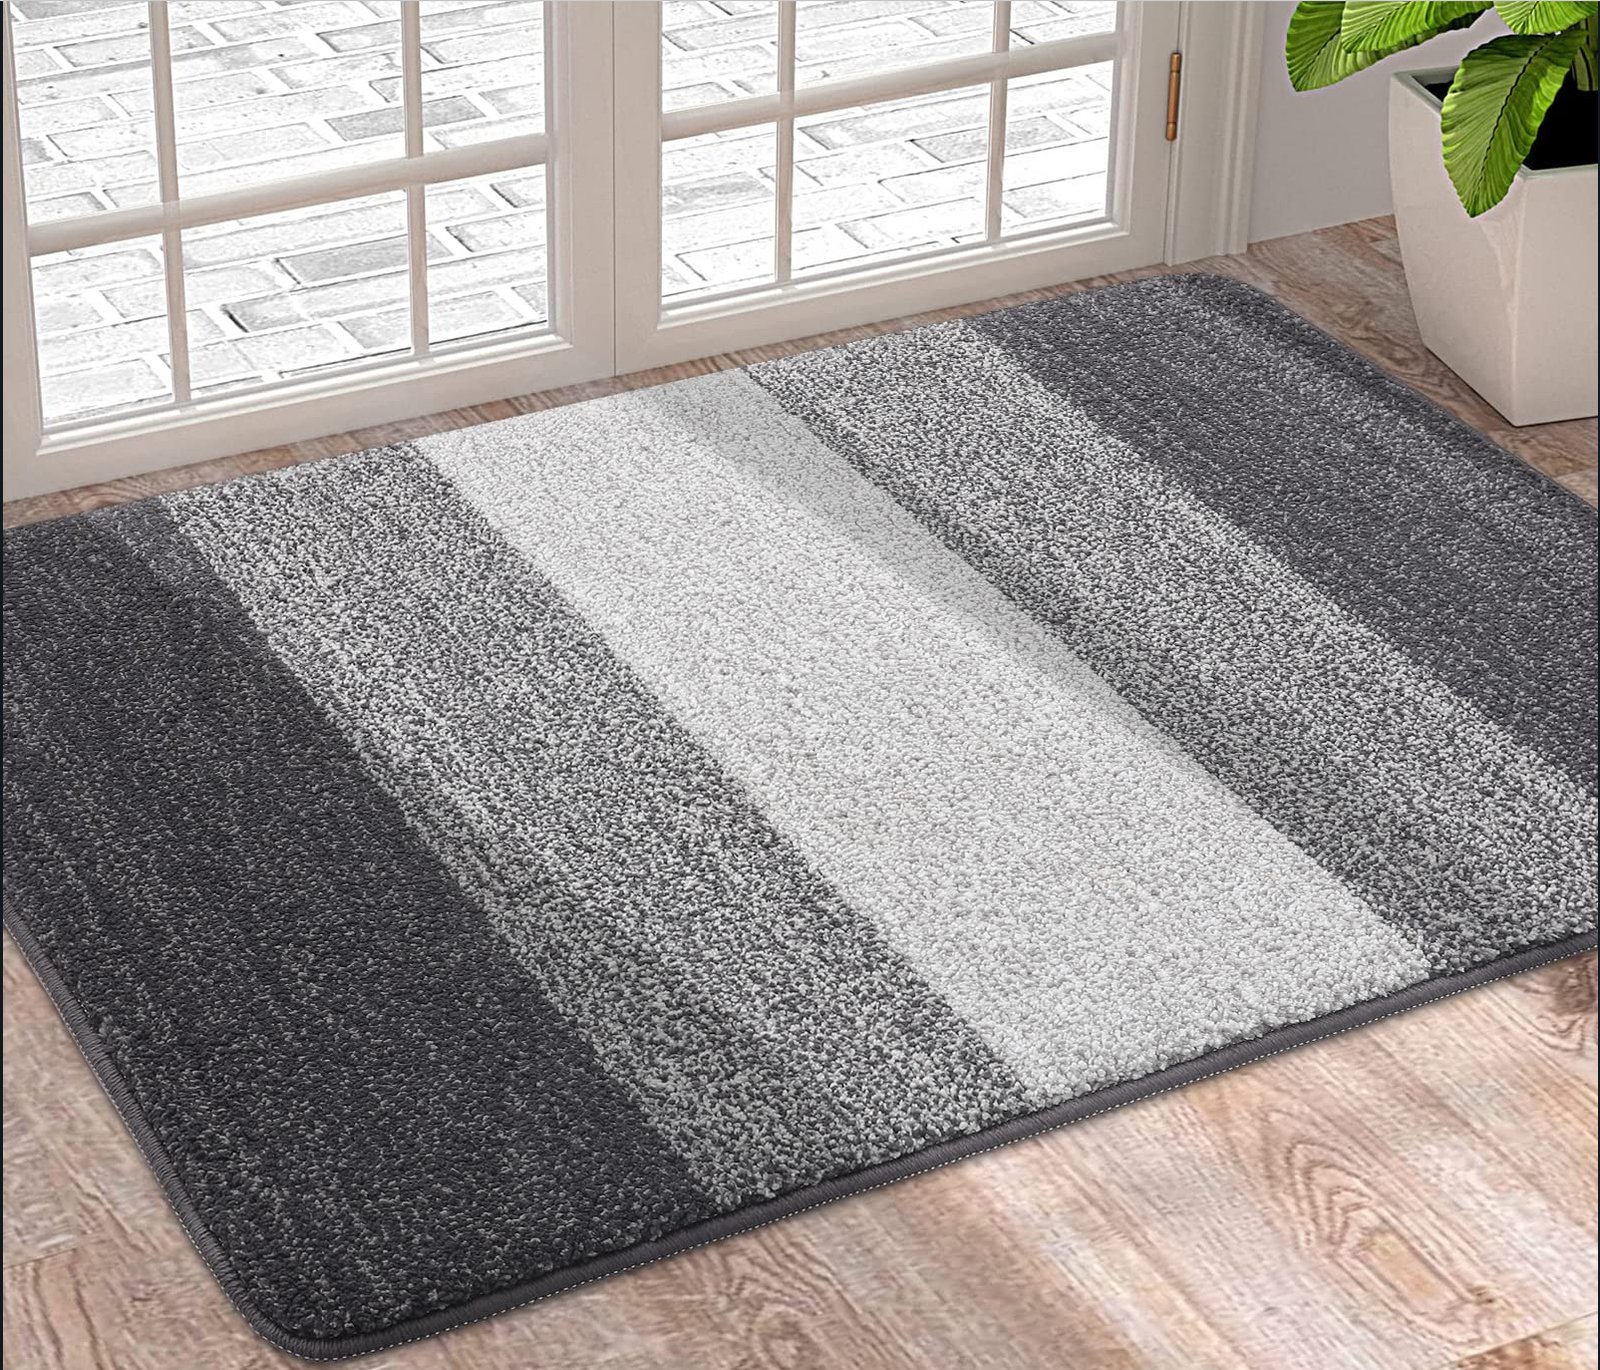 5 Best Washable Door mats in the UK The Ultimate Review